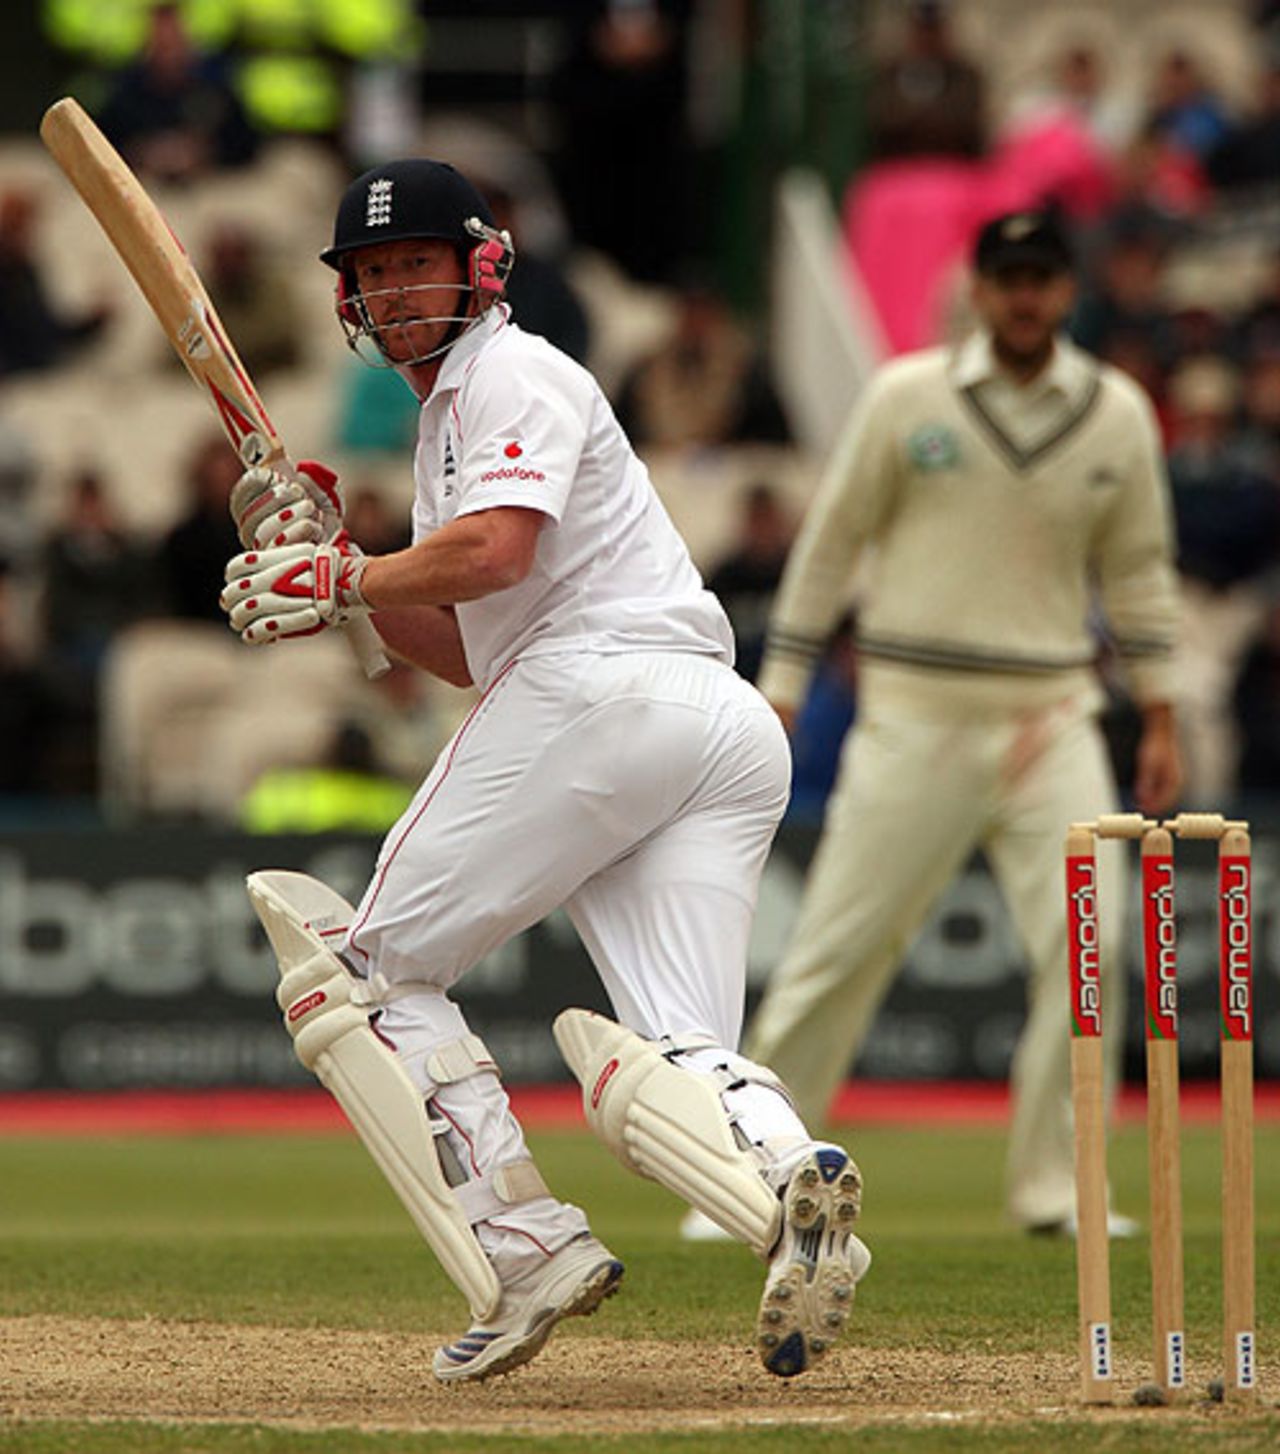 Paul Collingwood overcame his poor form to steer England to their victory, England v New Zealand, 2nd Test, Old Trafford, May 25, 2008